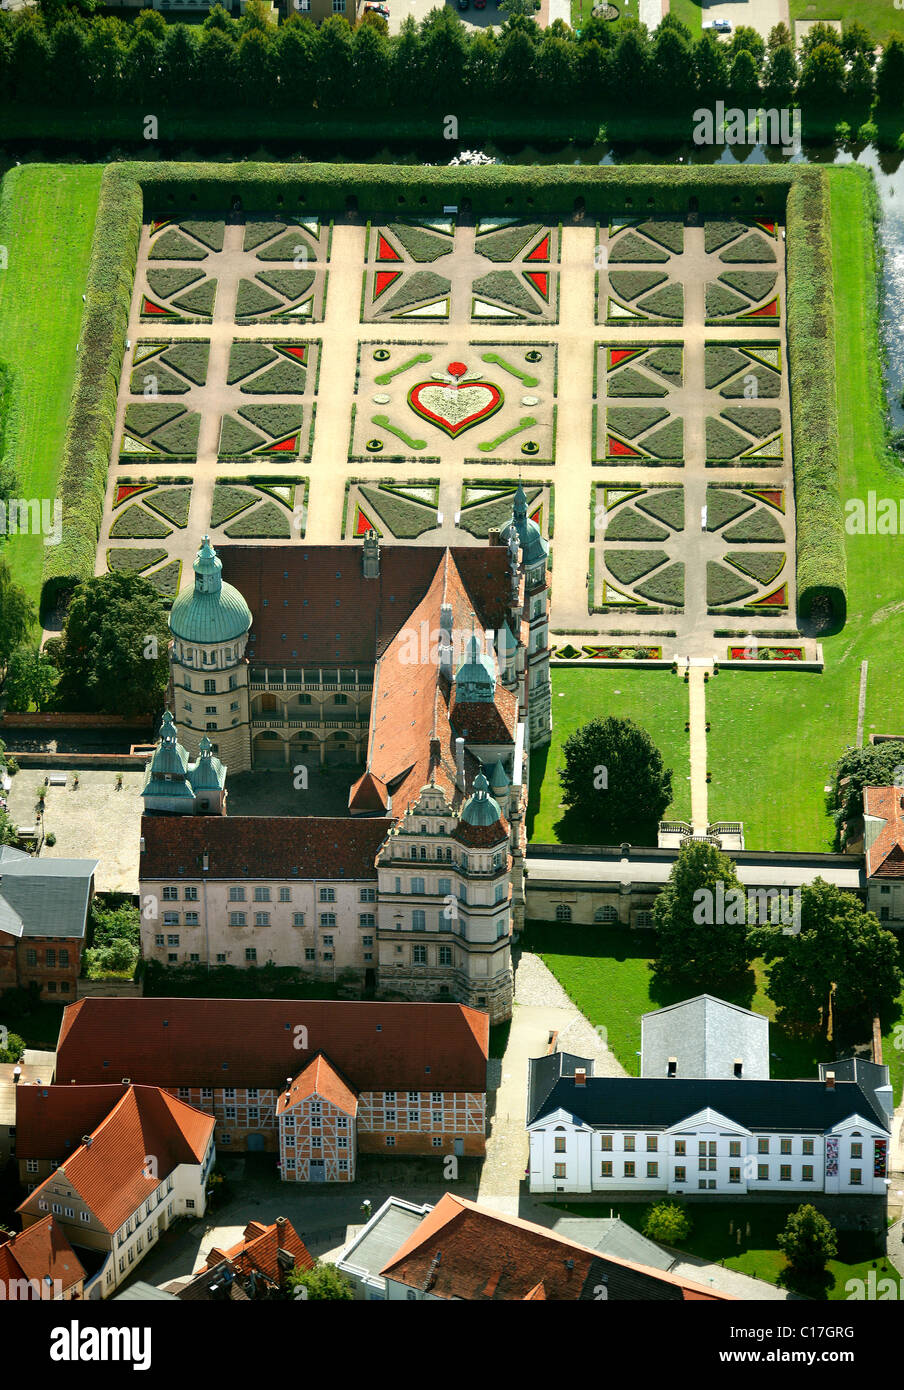 Areal view, Guestrow Castle, jardin baroque, Barlachstadt, Guestrow, Mecklembourg-Poméranie-Occidentale, Allemagne, Europe Banque D'Images